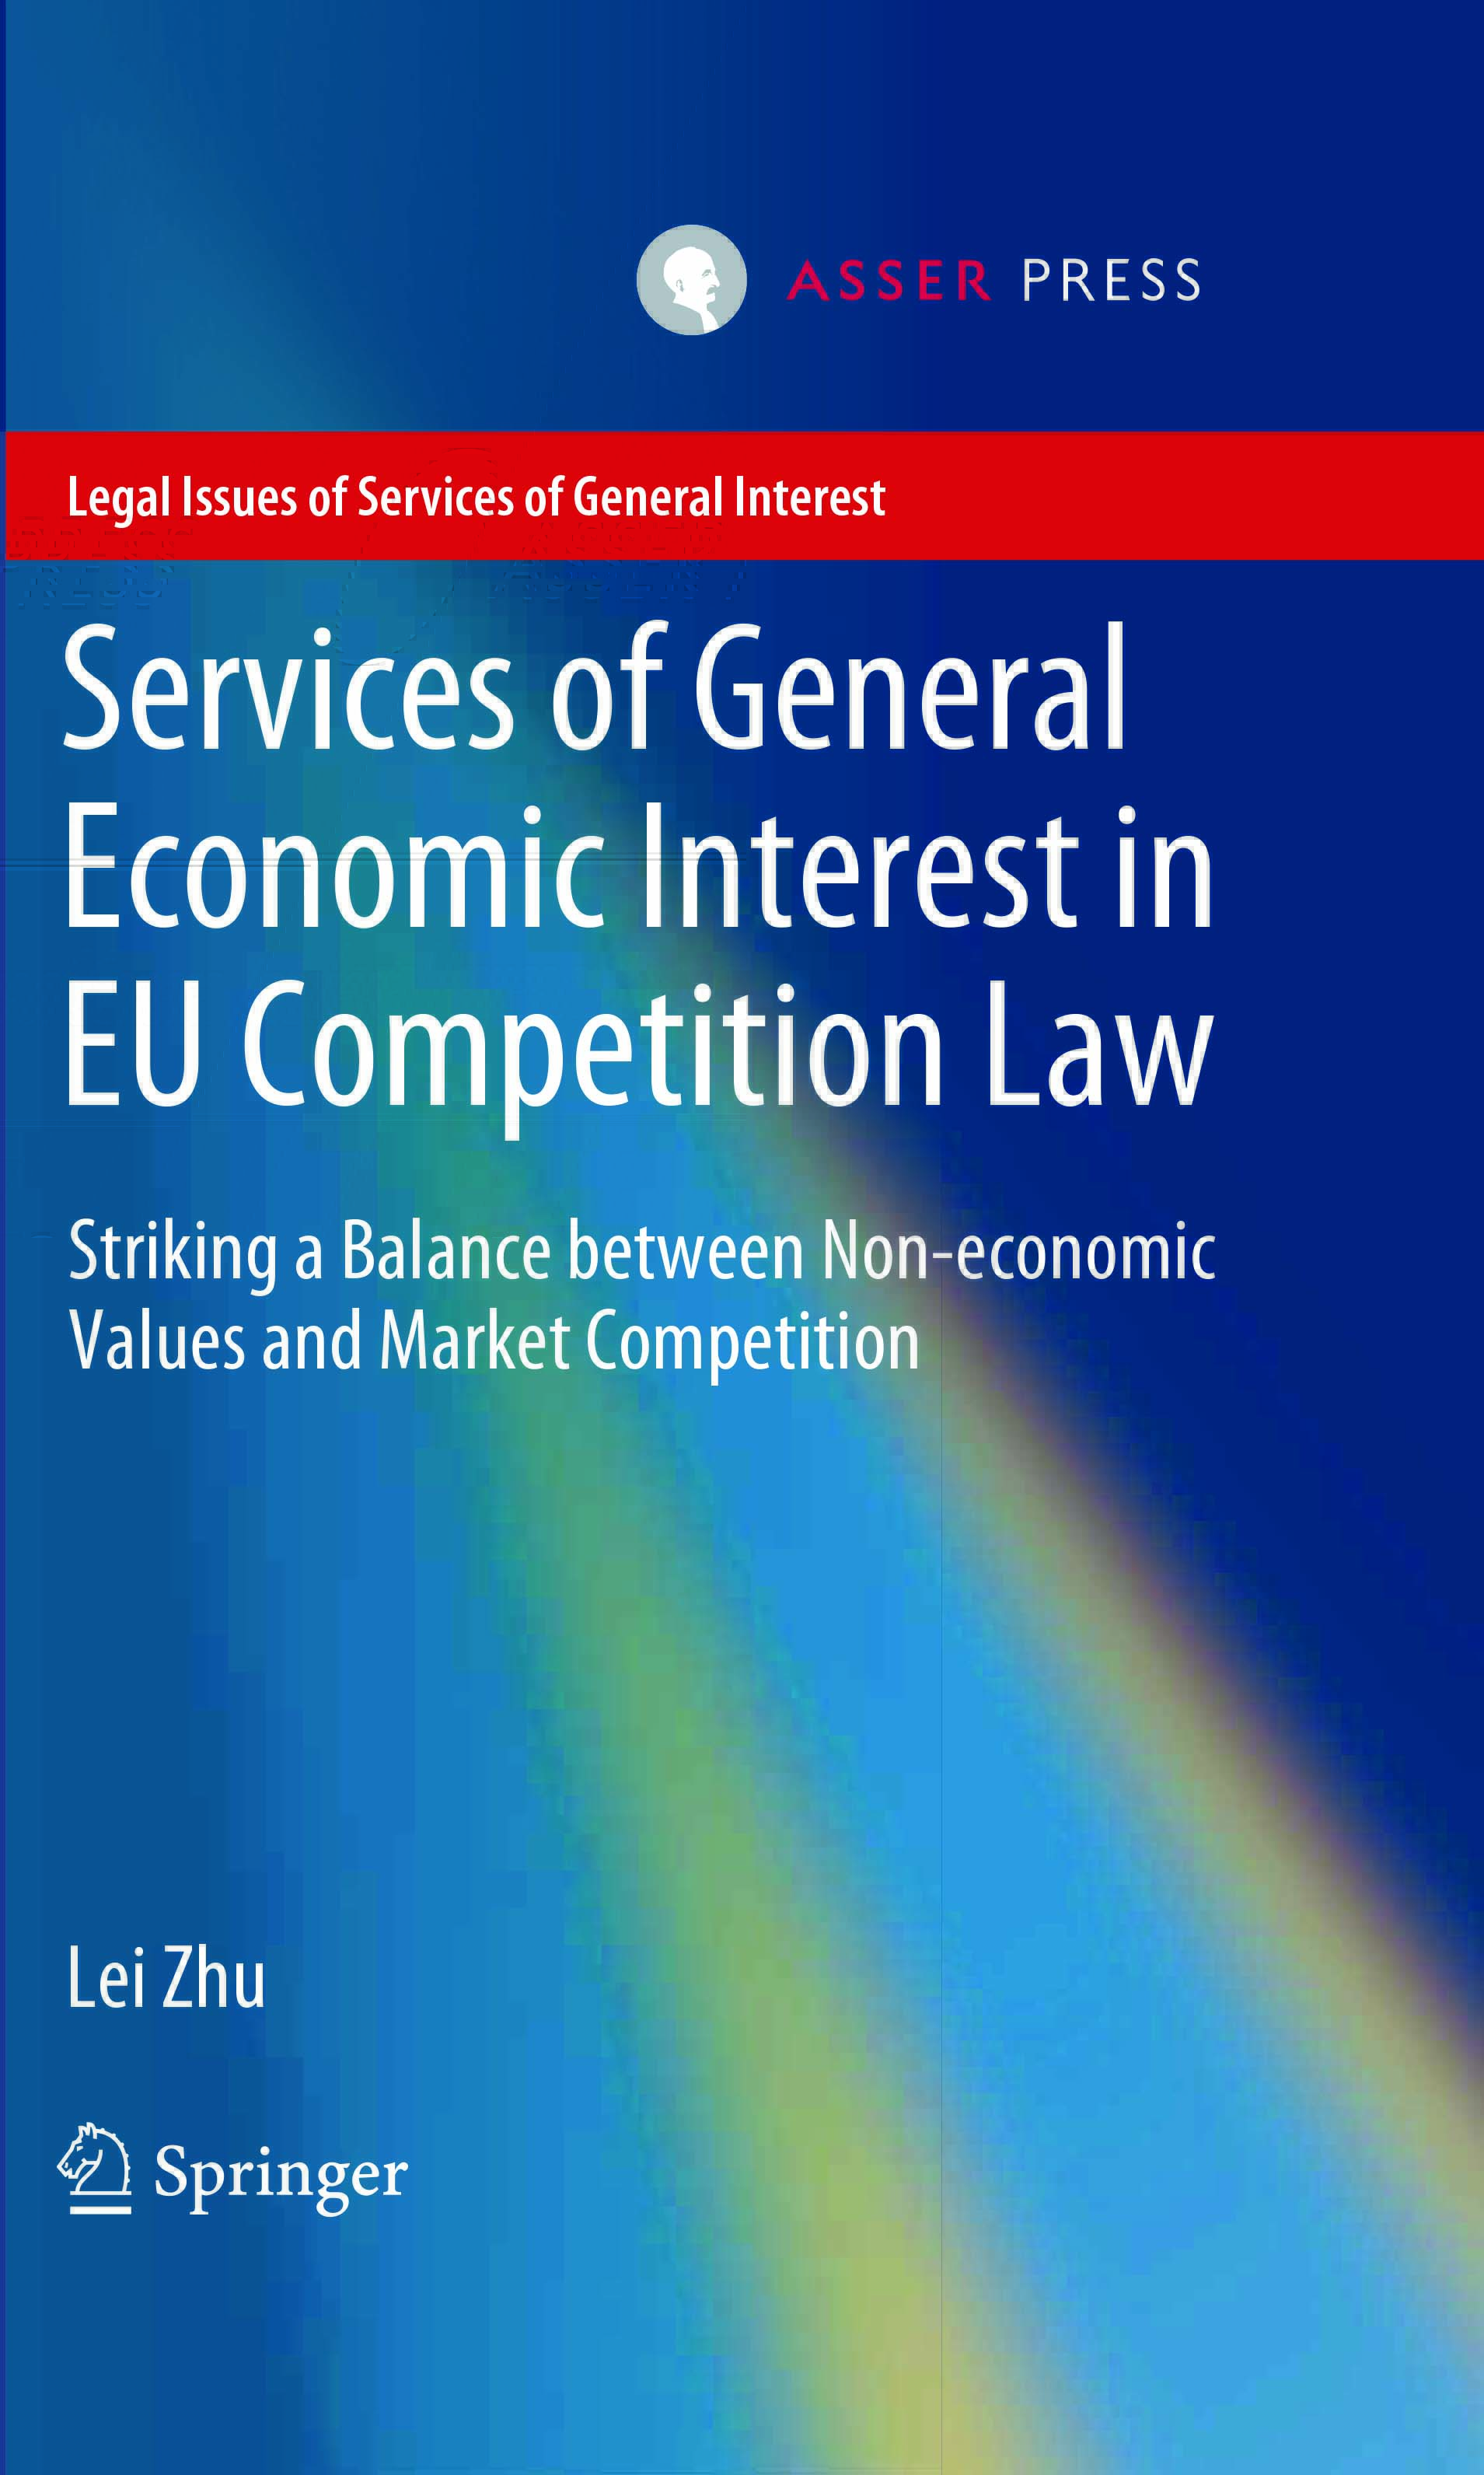 Services of General Economic Interest in EU Competition Law - Striking a Balance between Non-economic Values and Market Competition